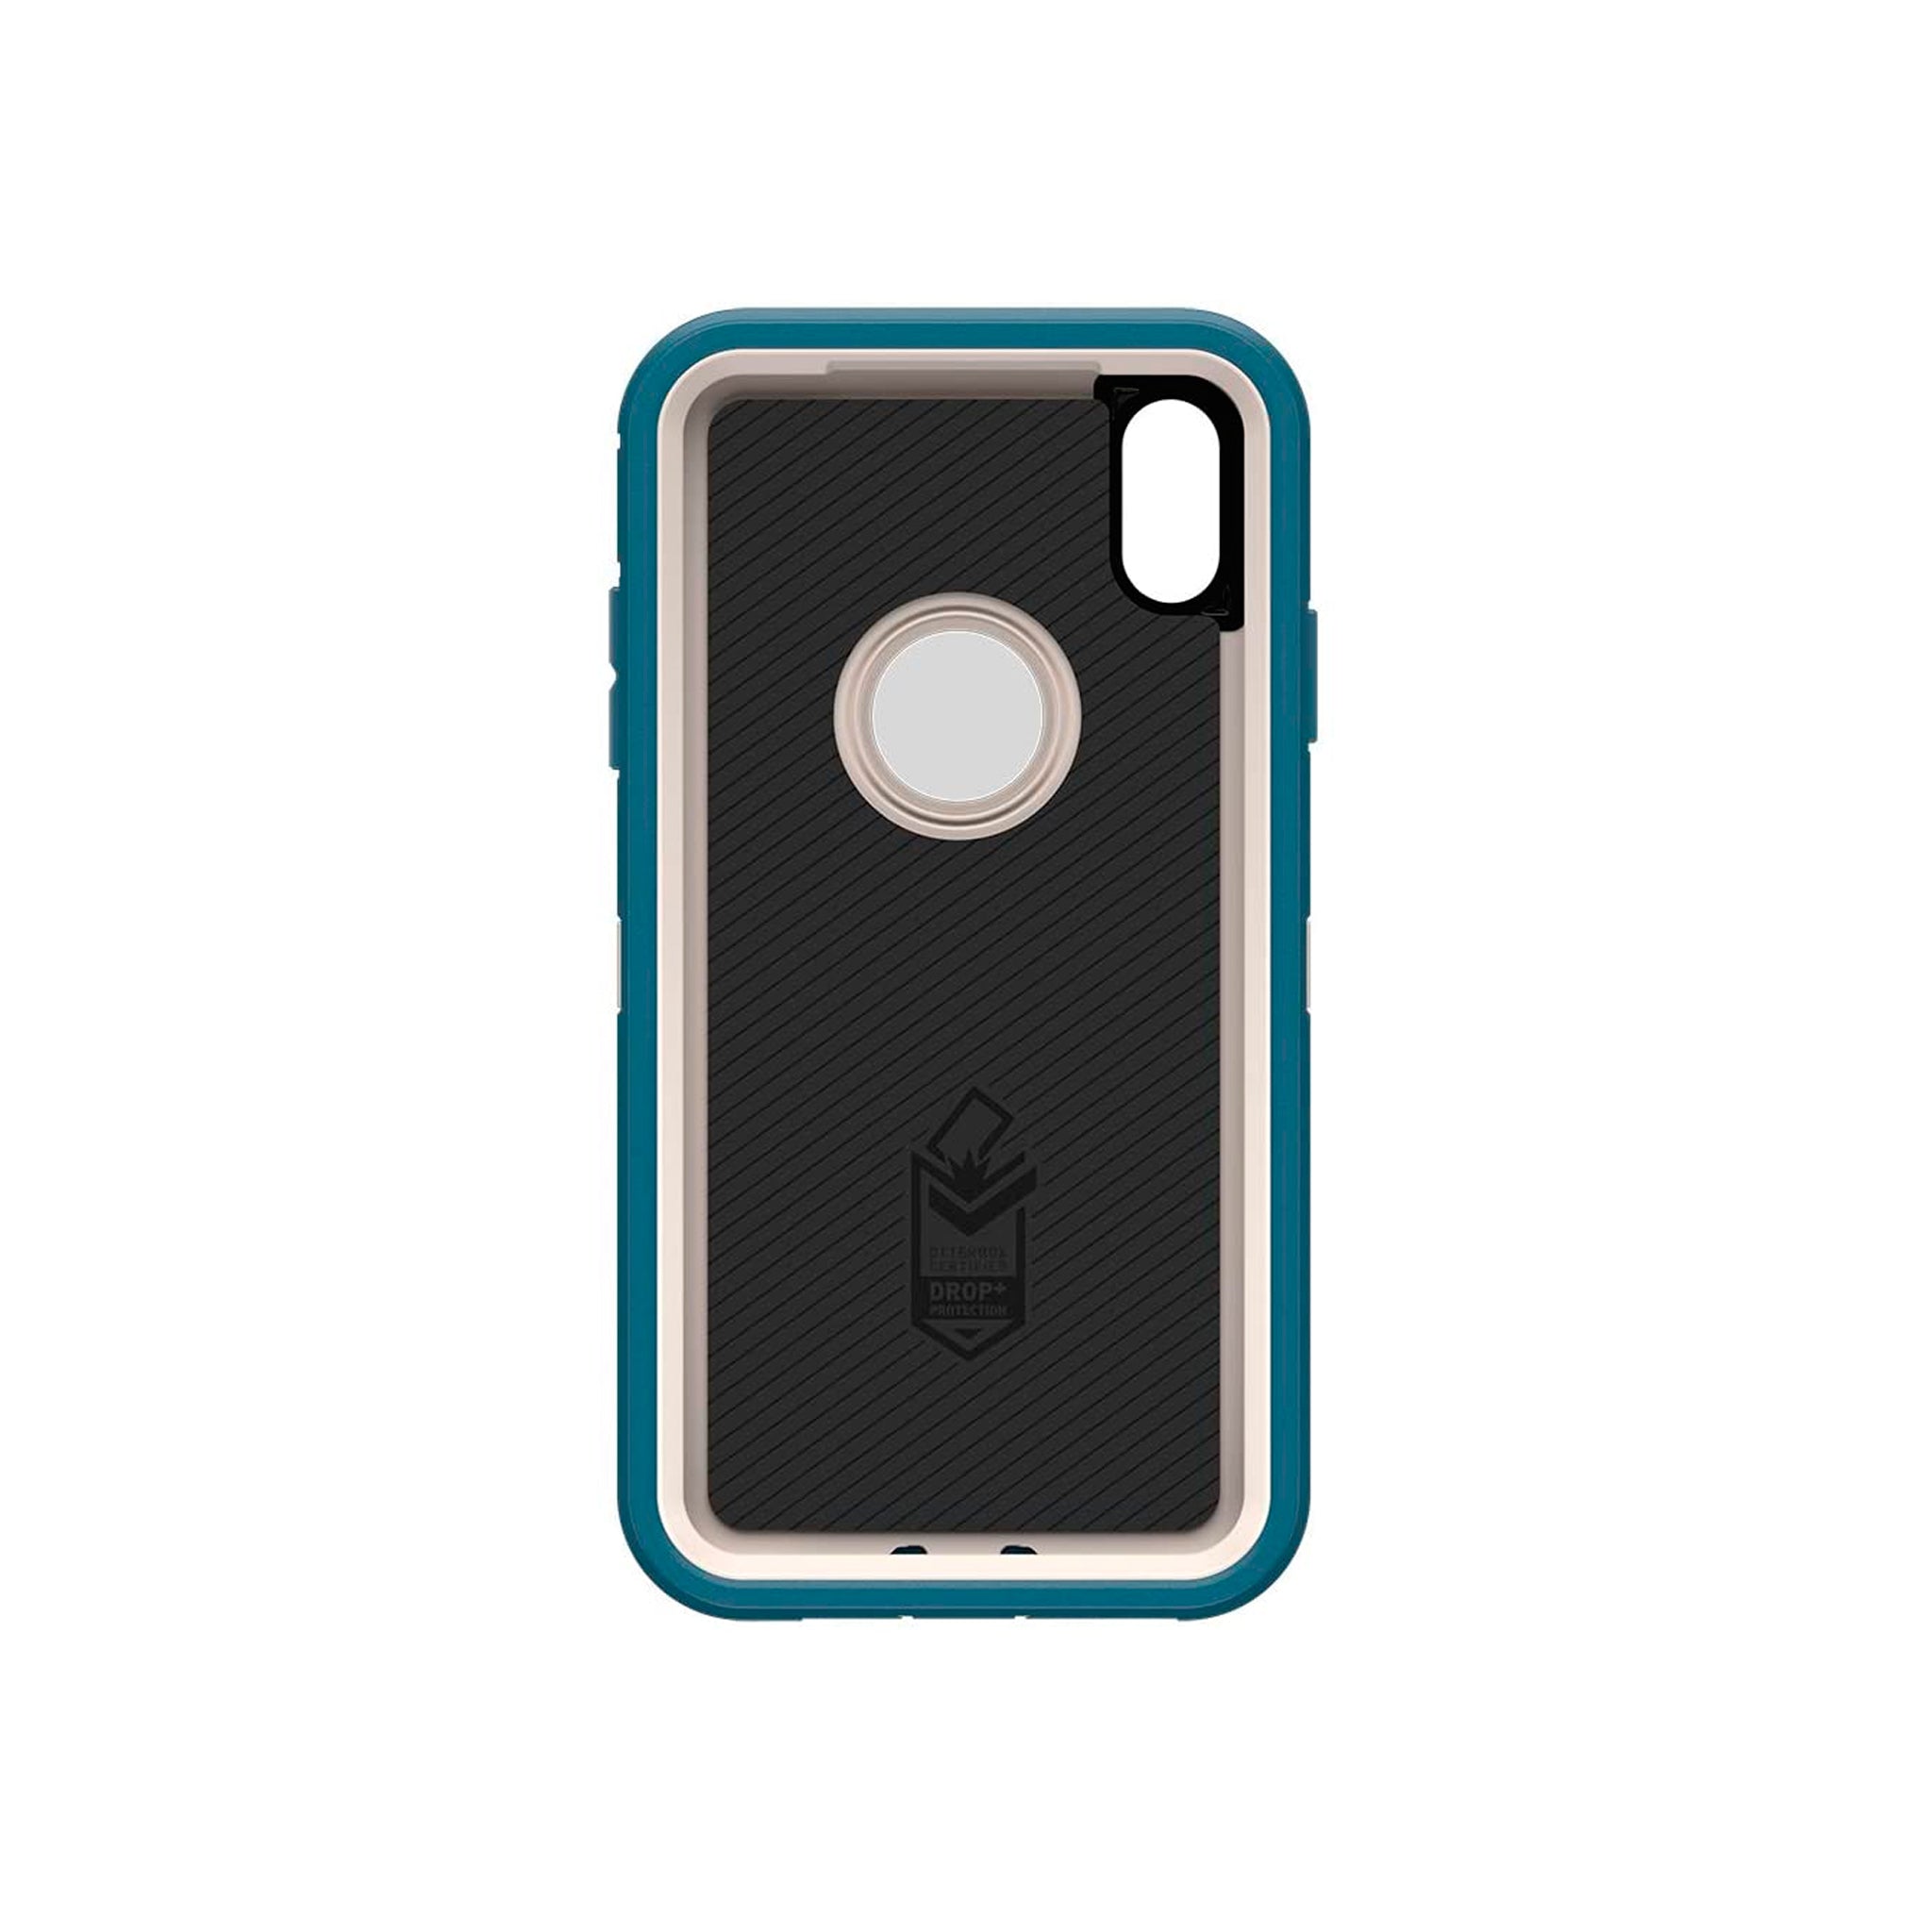 OtterBox - Defender Serie Case for iPhone XS Max - Big Sur